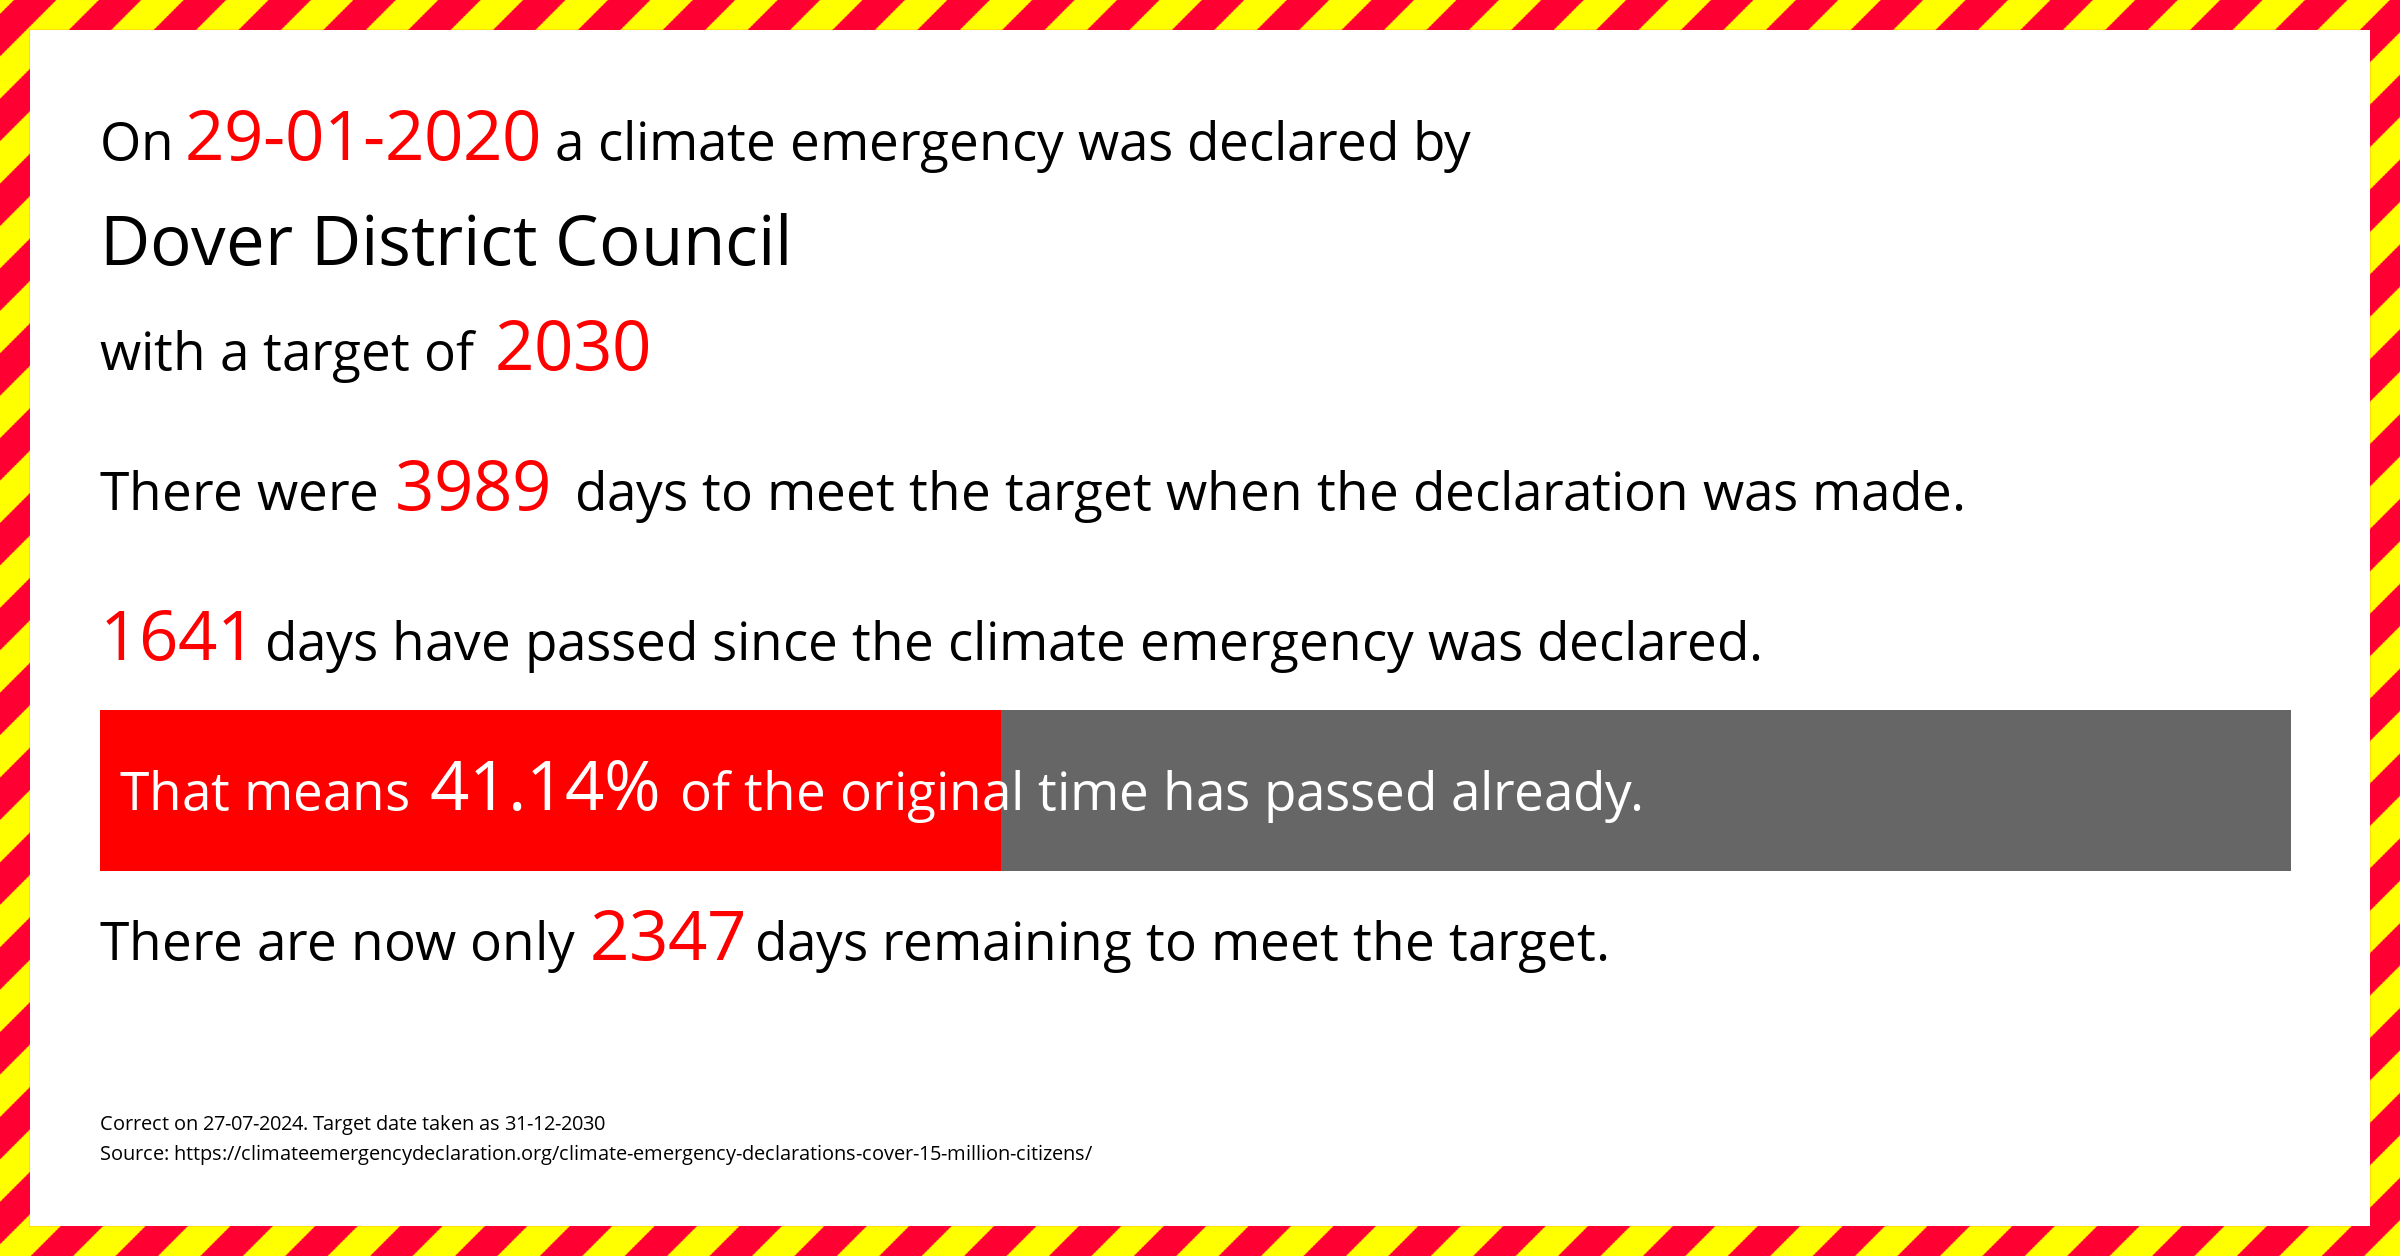 Dover District Council  declared a Climate emergency on Wednesday 29th January 2020, with a target of 2030.